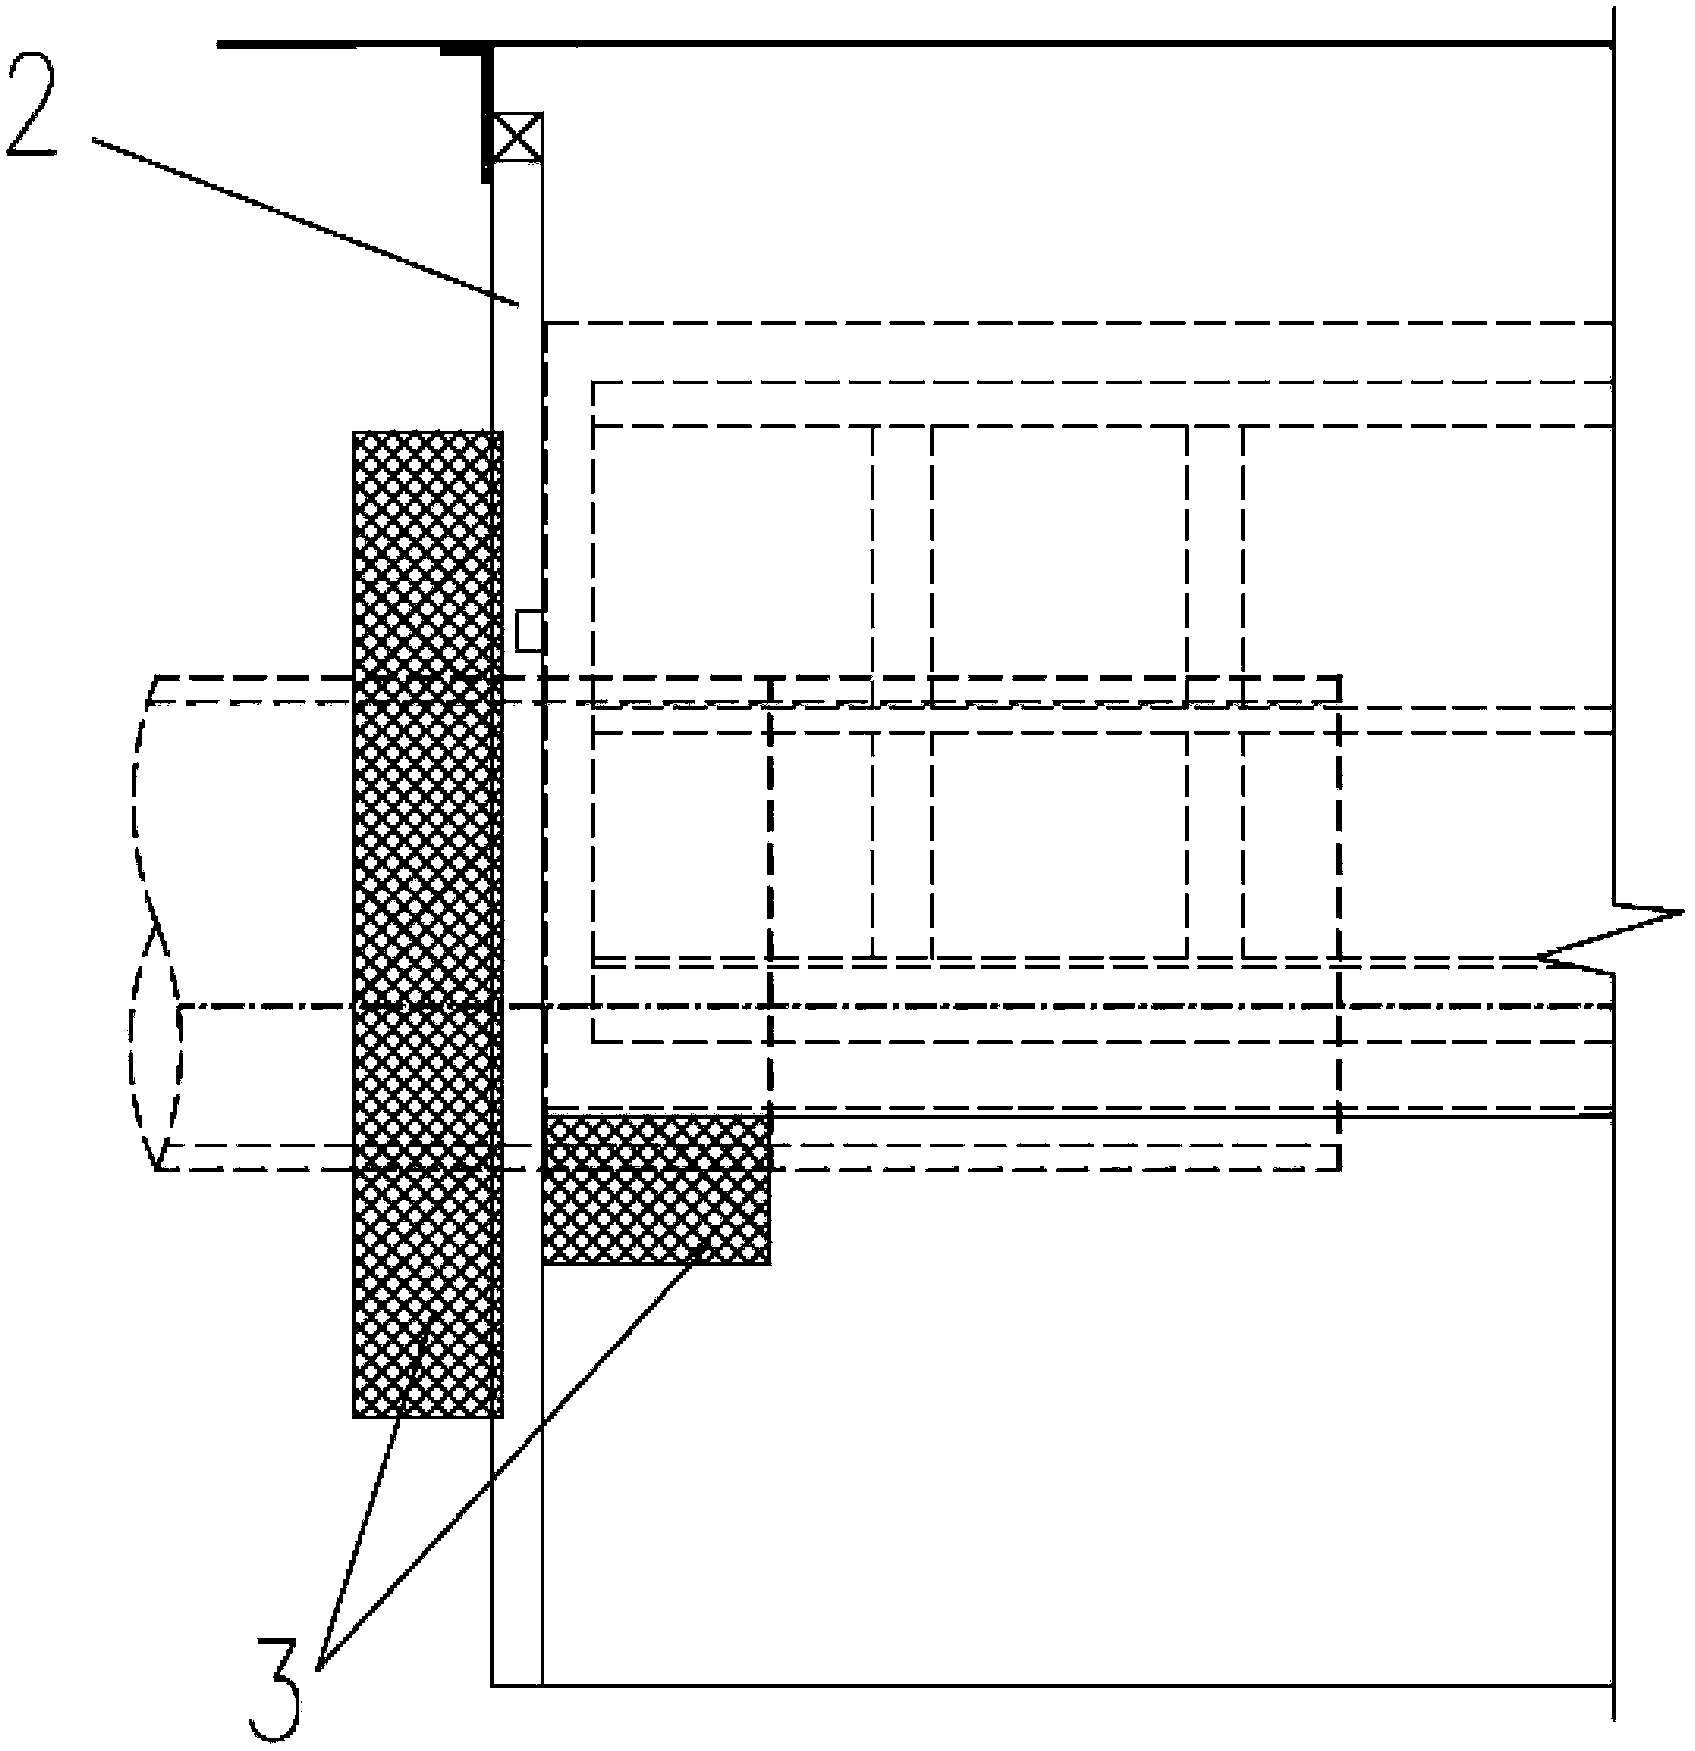 Construction method for lifting out shield tunneling machine under condition of envelop enclosure